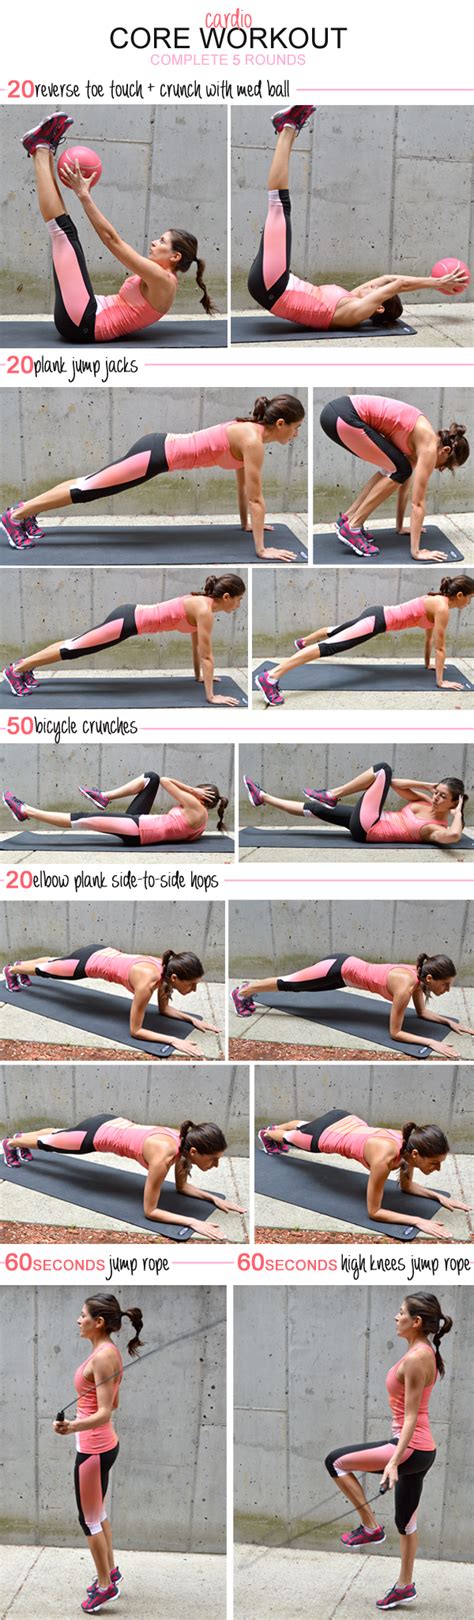 Cardio Core Workout Pumps And Iron